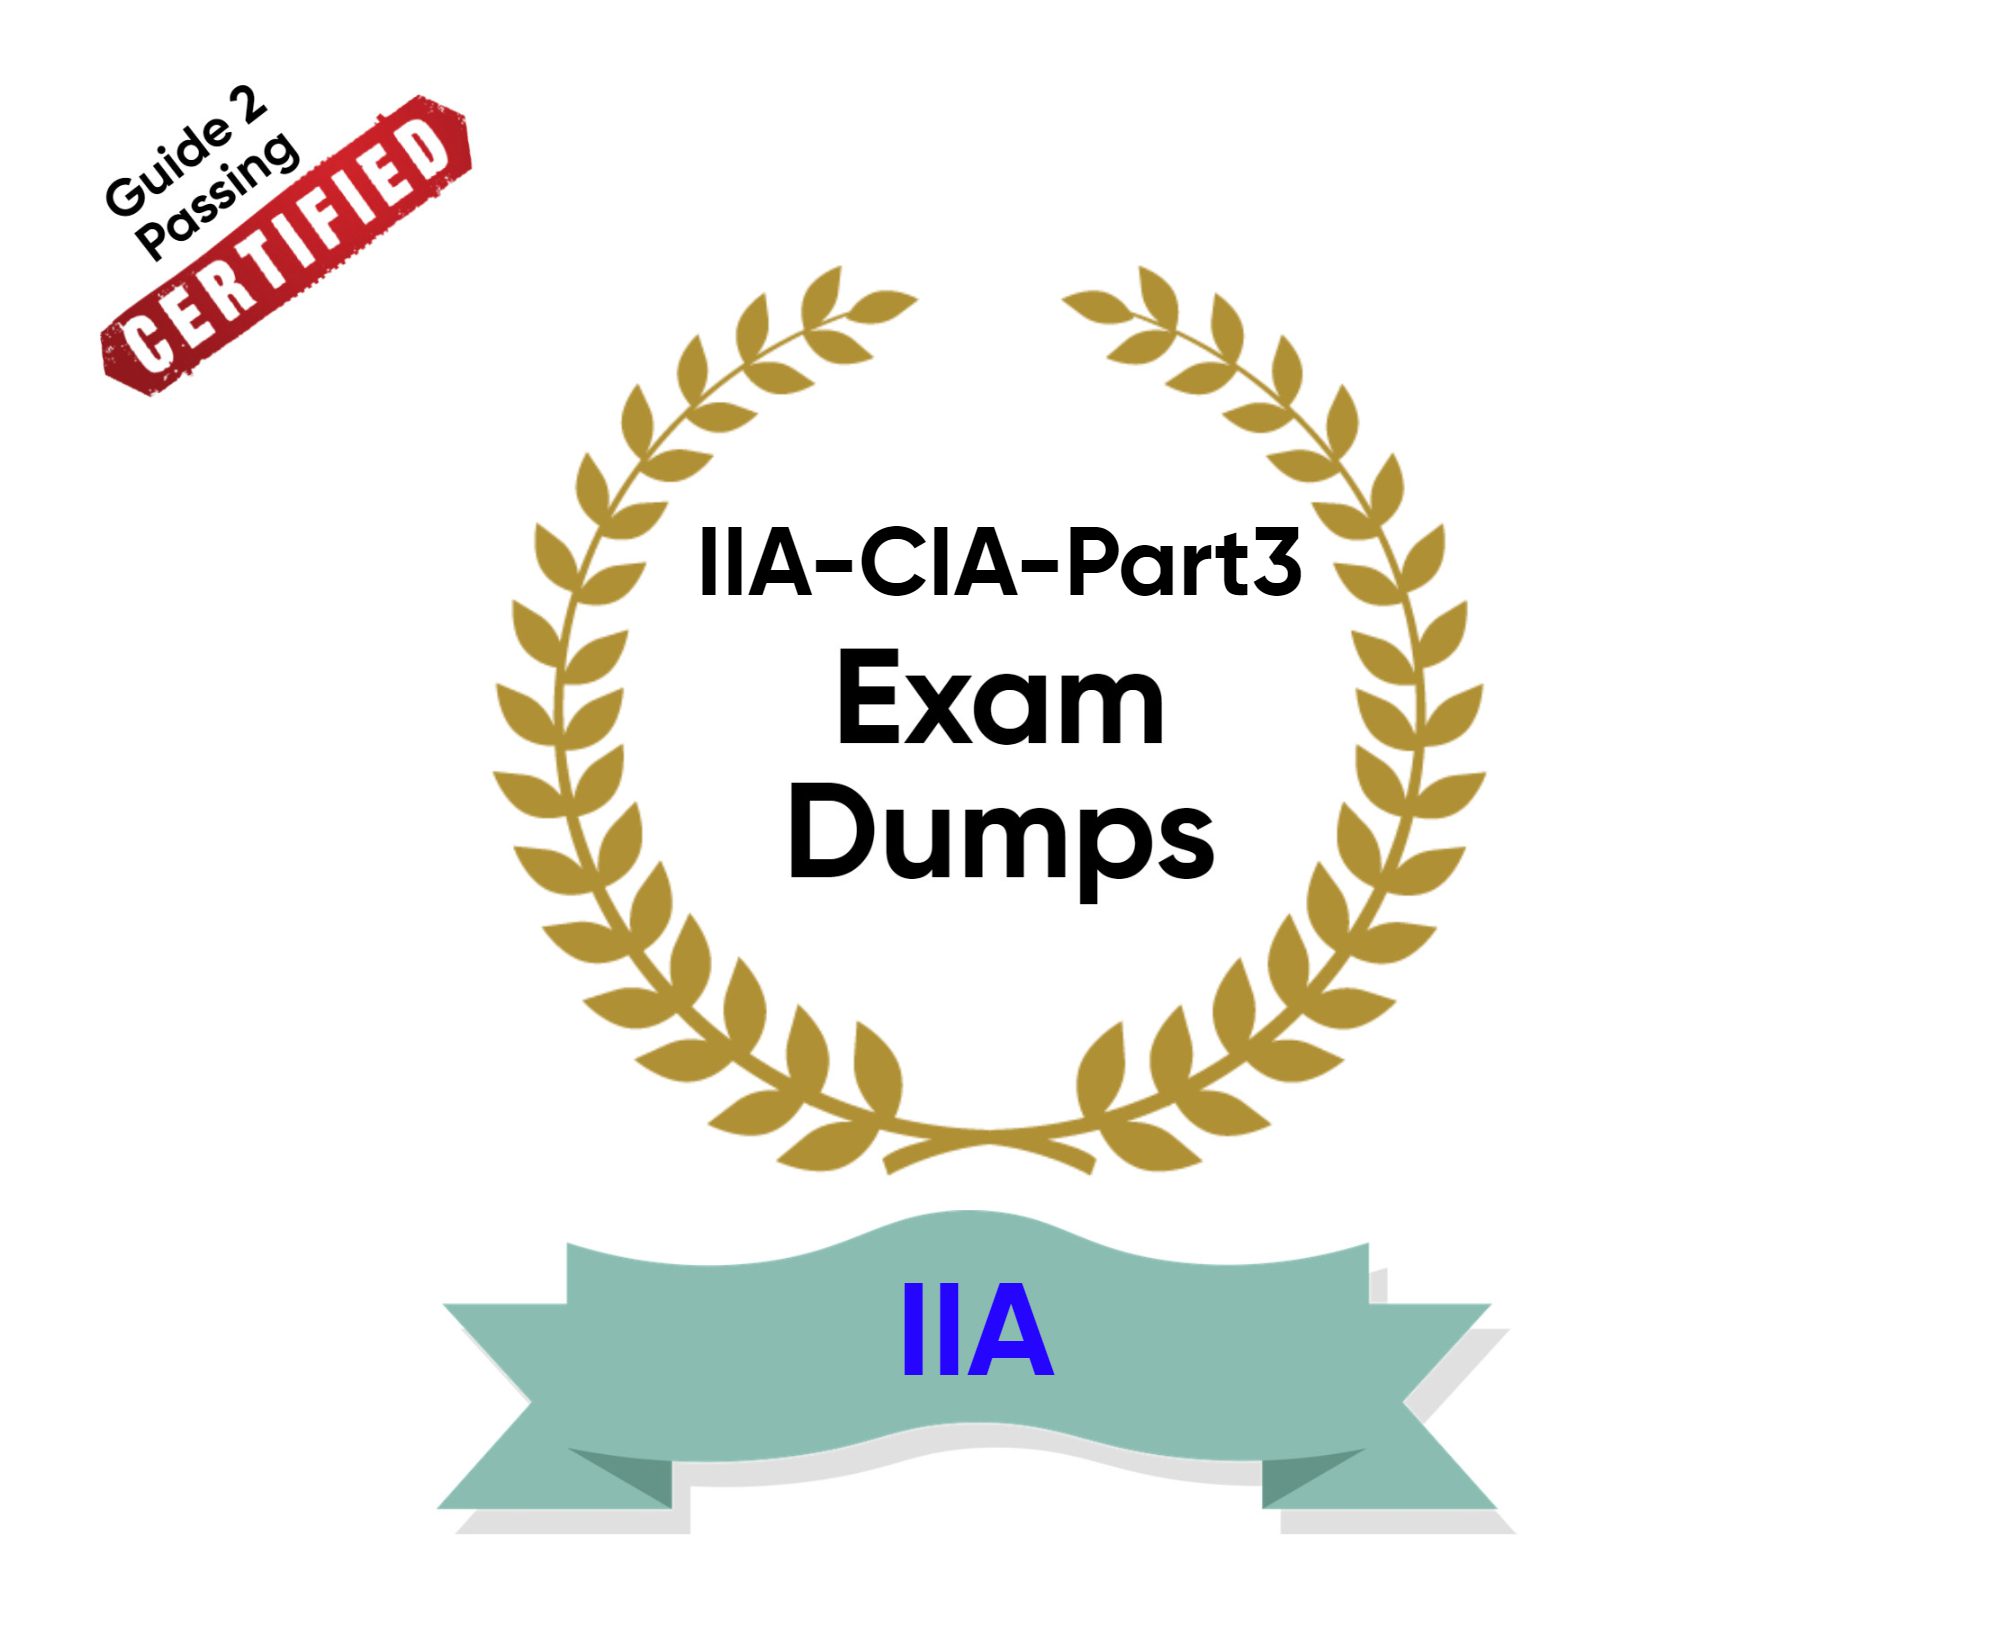 Pass Your IIA IIA-CIA-Part3 Exam Dumps From Guide 2 Passing